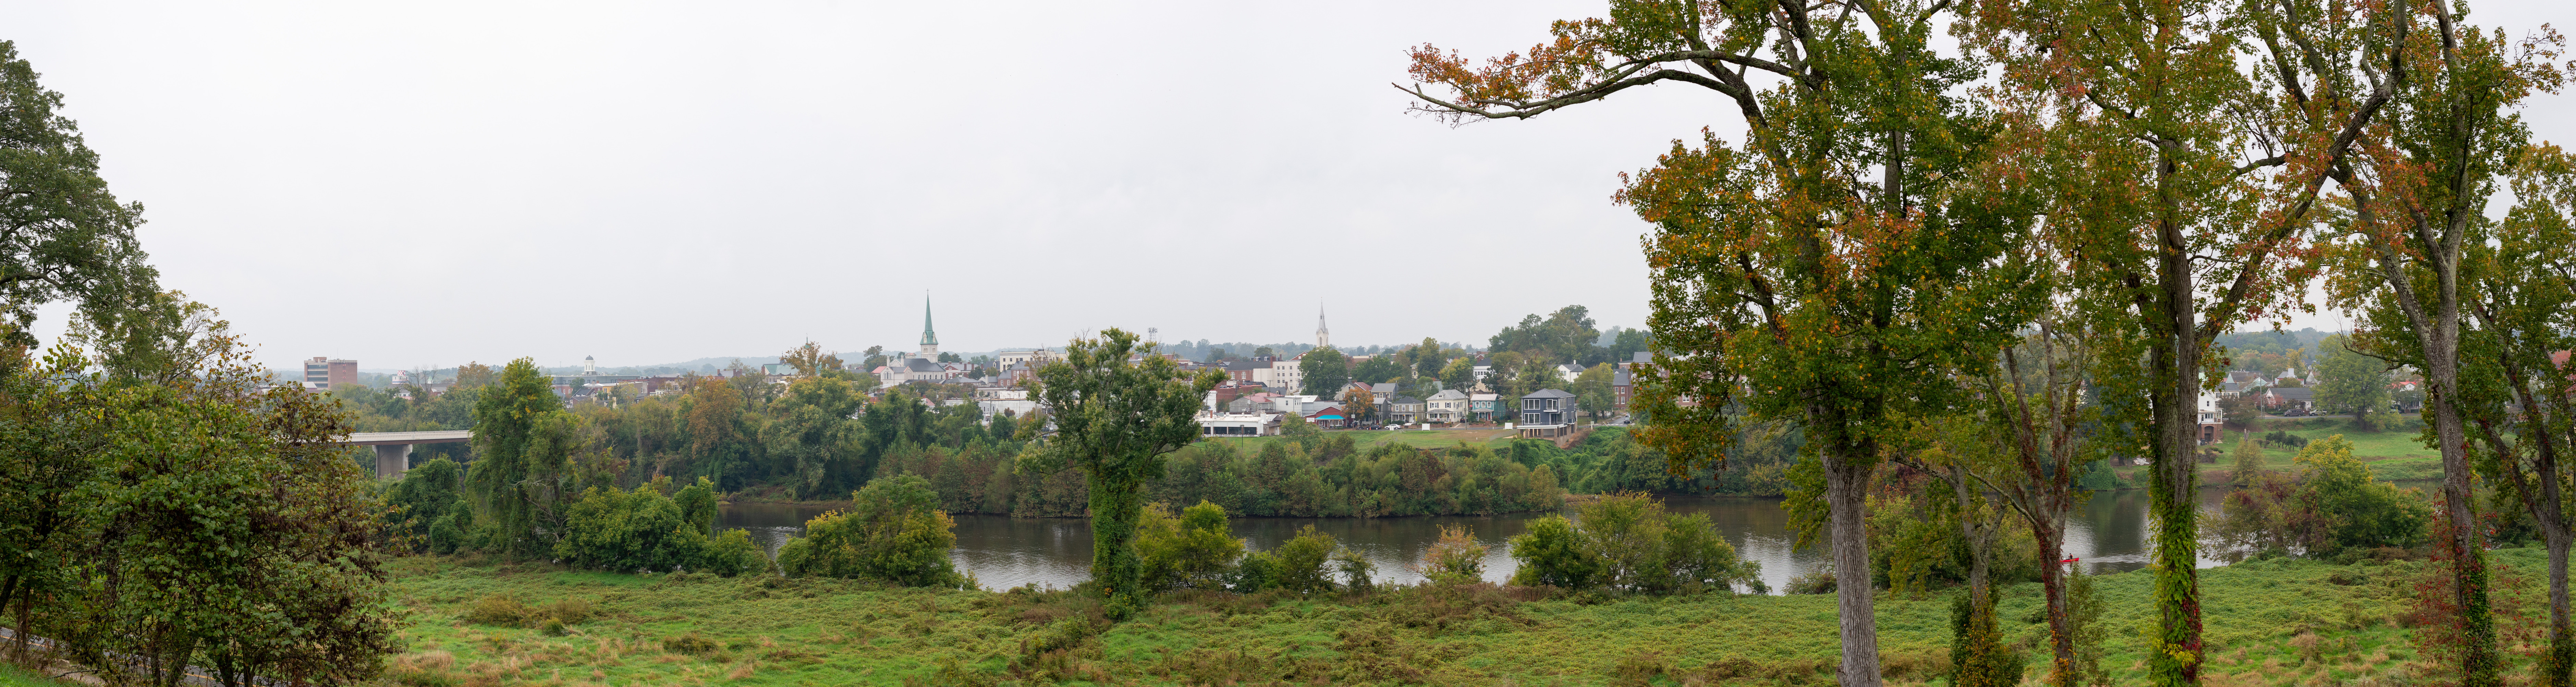 View  across a river to a small town in the distance on a cloudy day.